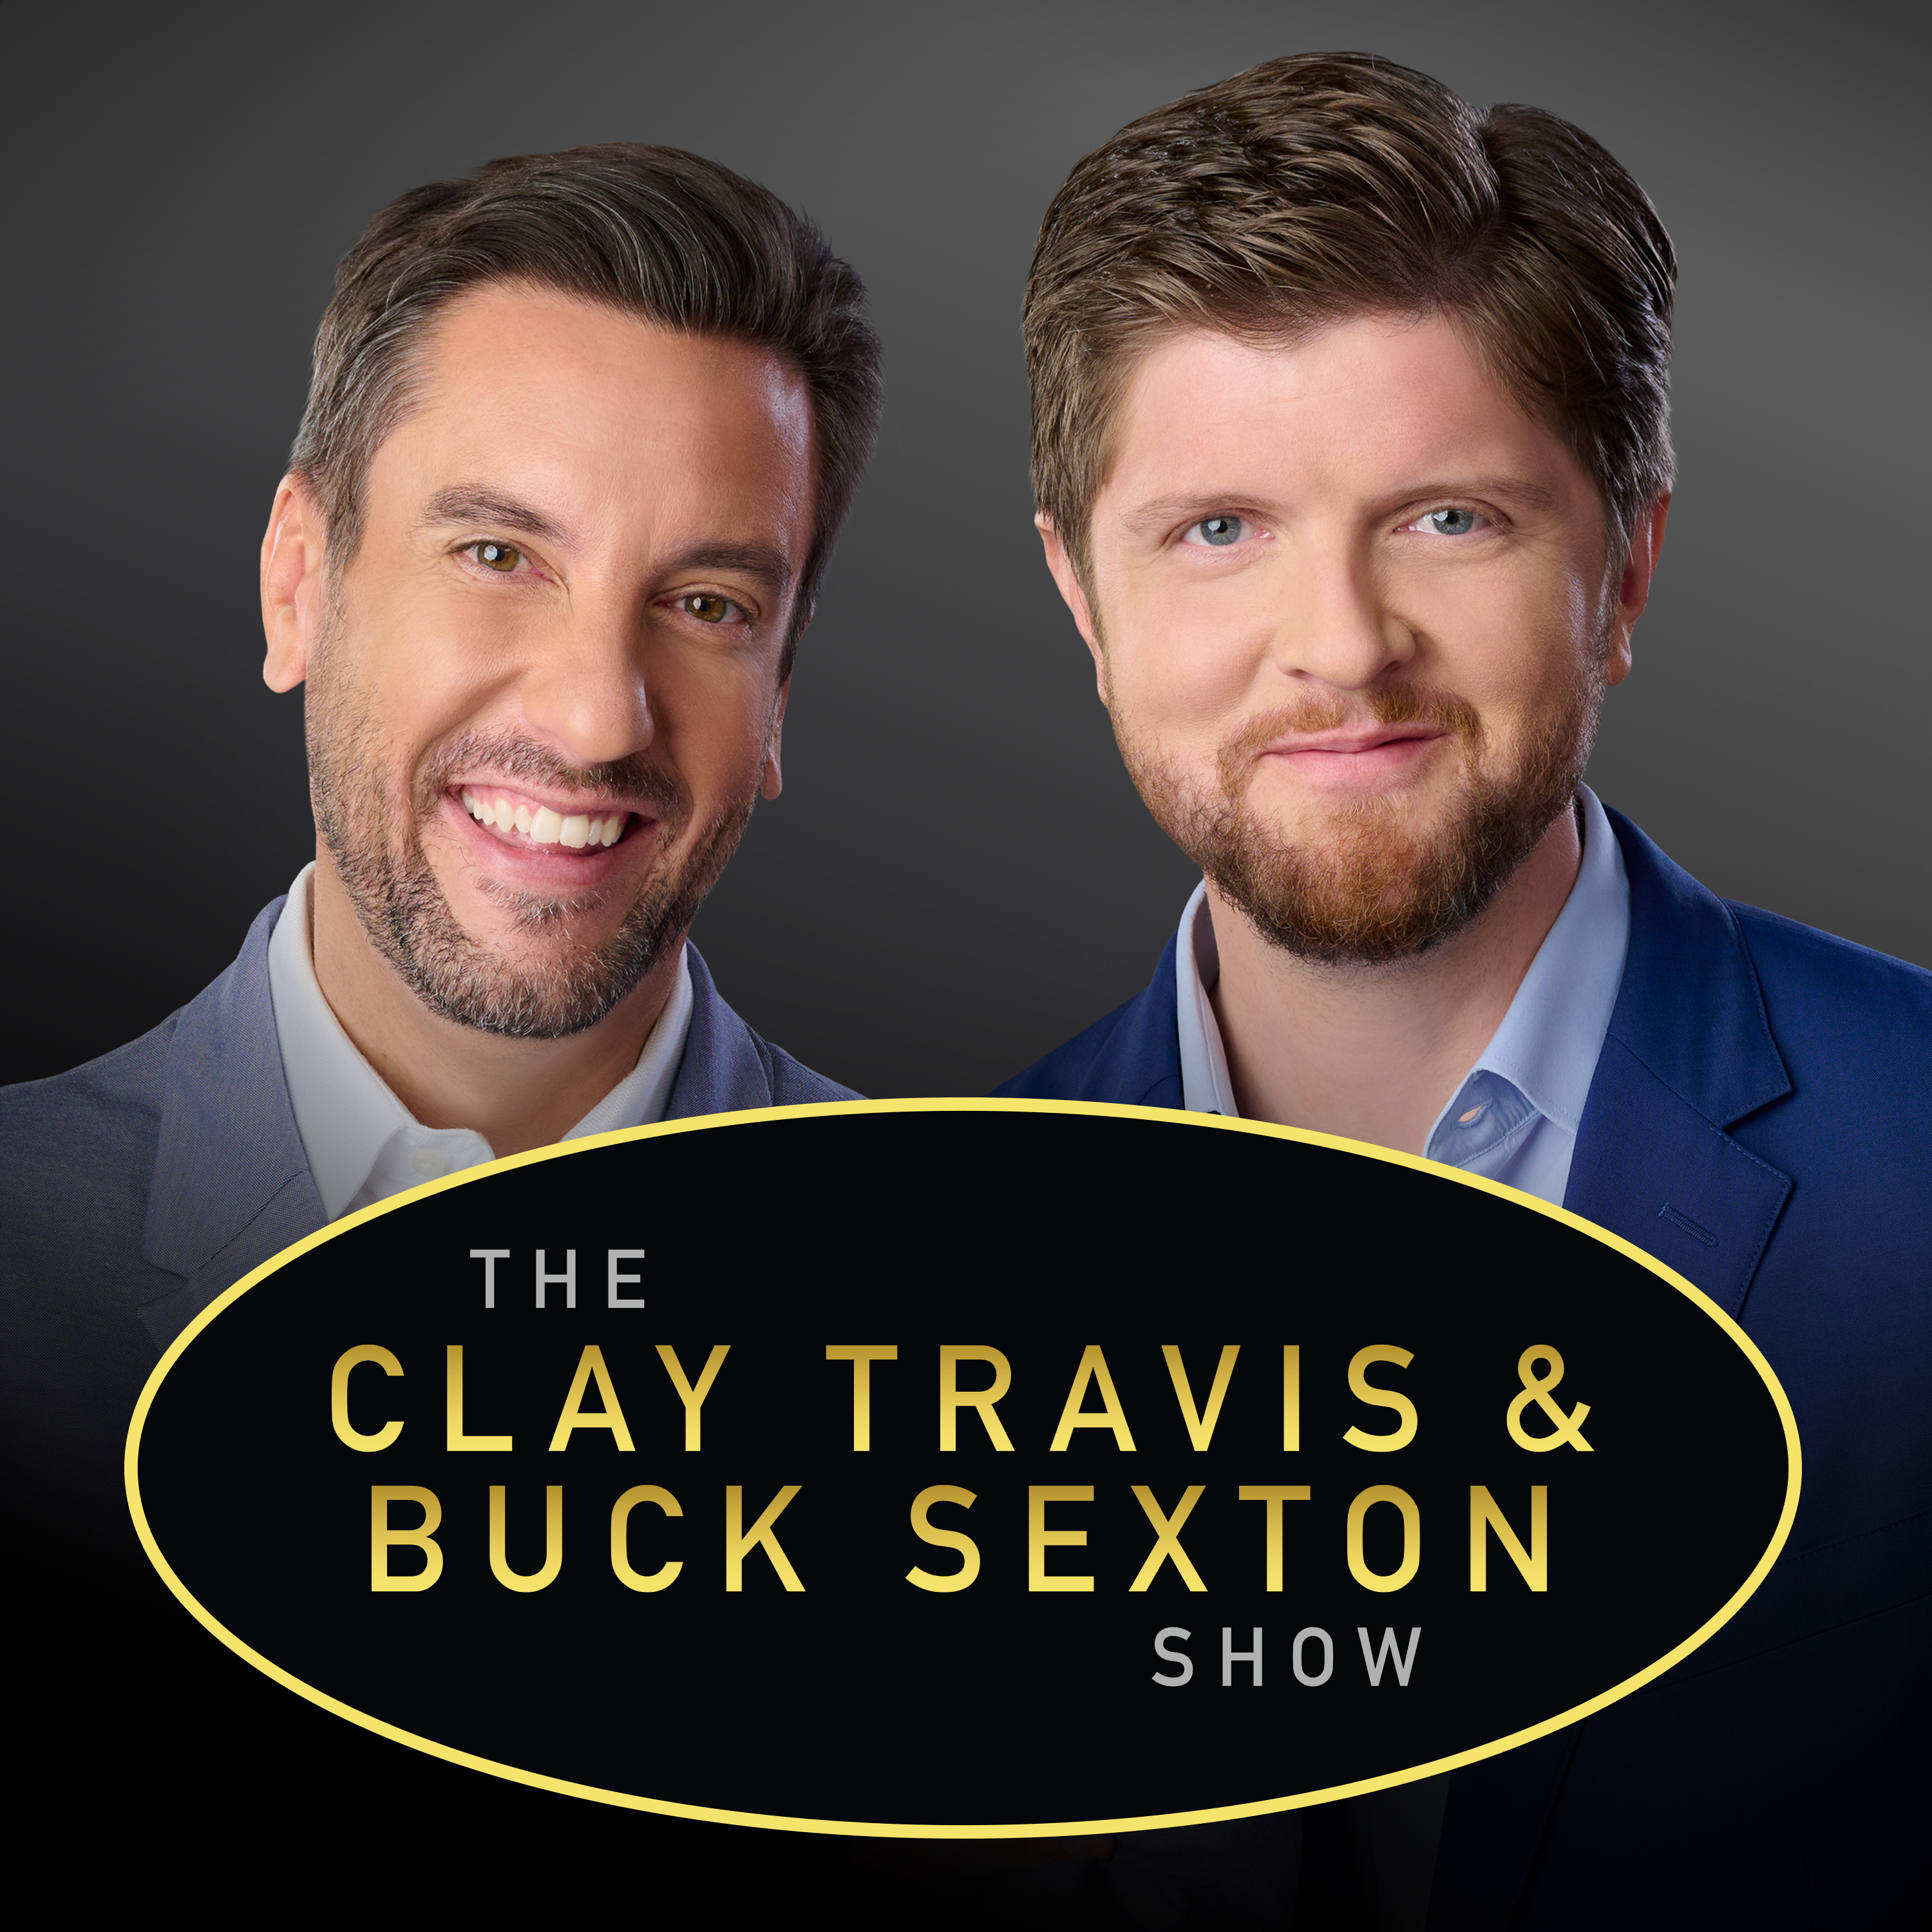 Clay Travis and Buck Sexton Show H1 - Sep 21 2022